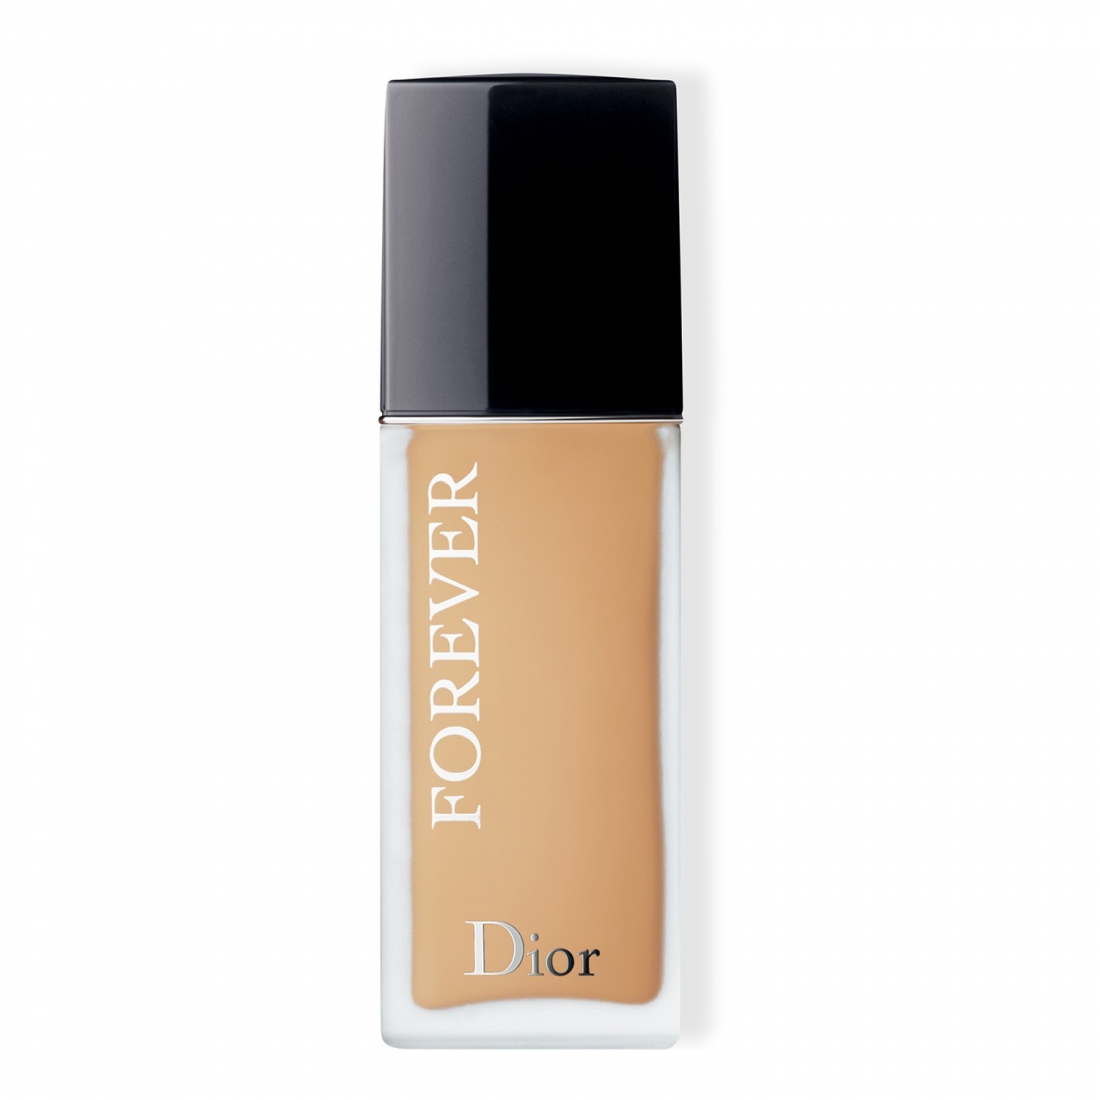 'Diorskin Forever' Foundation - 2WO Warm Olive 30 ml